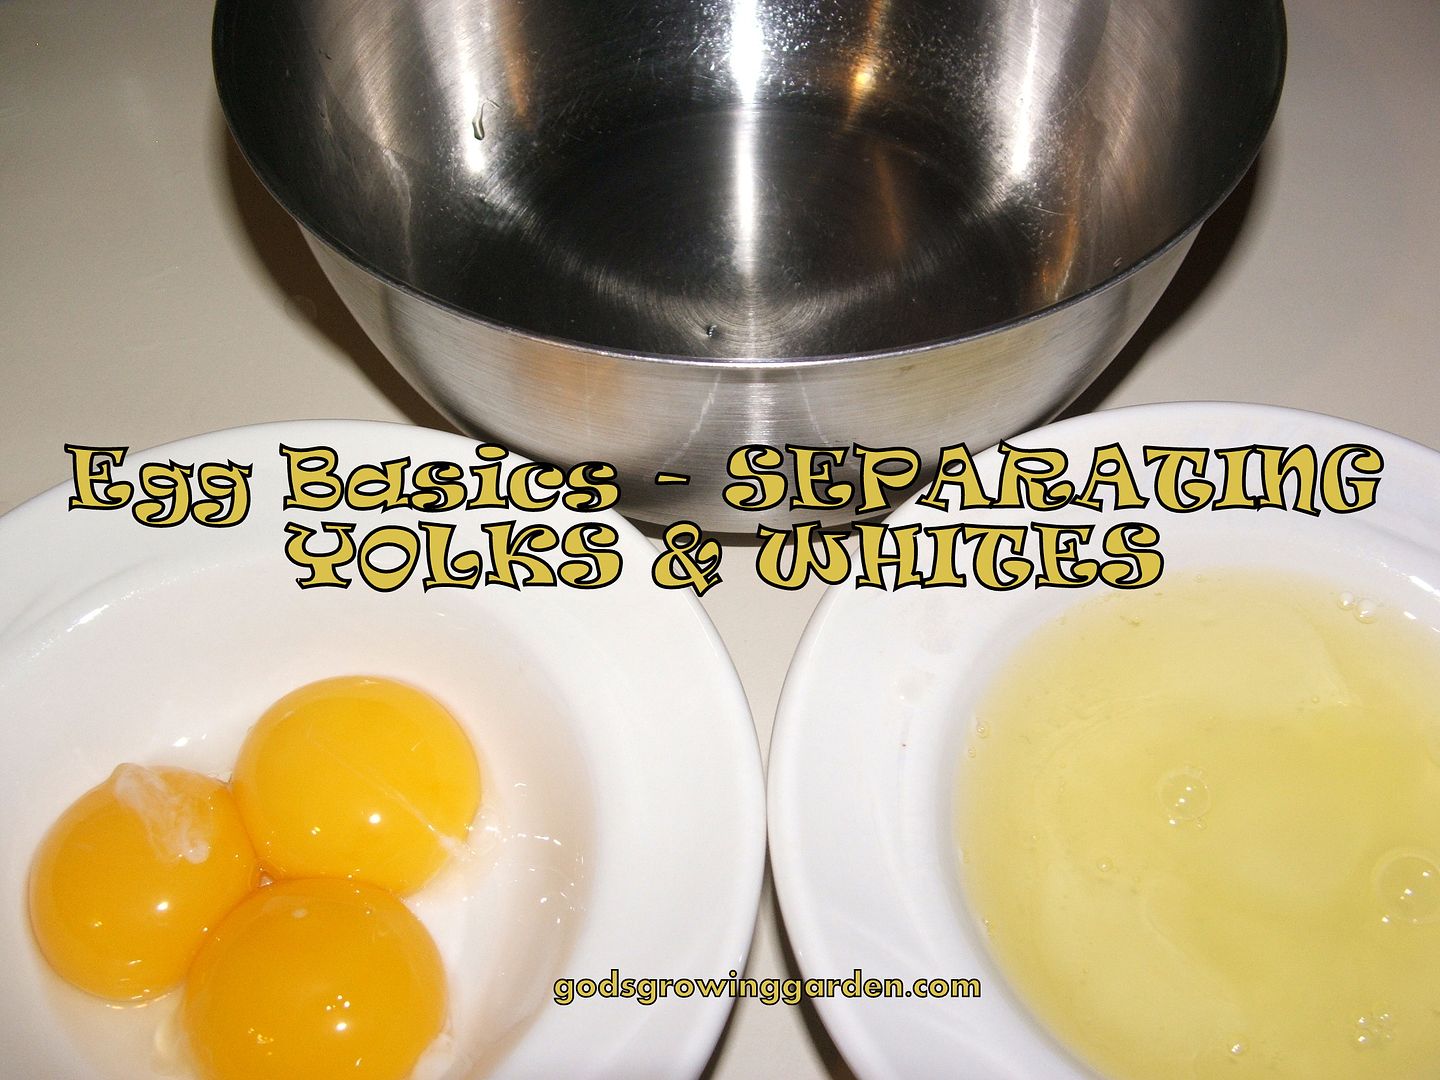 Separating Eggs by Angie Ouellette-Tower for godsgrowinggarden.com photo 015_zpsc0bf1d0e.jpg